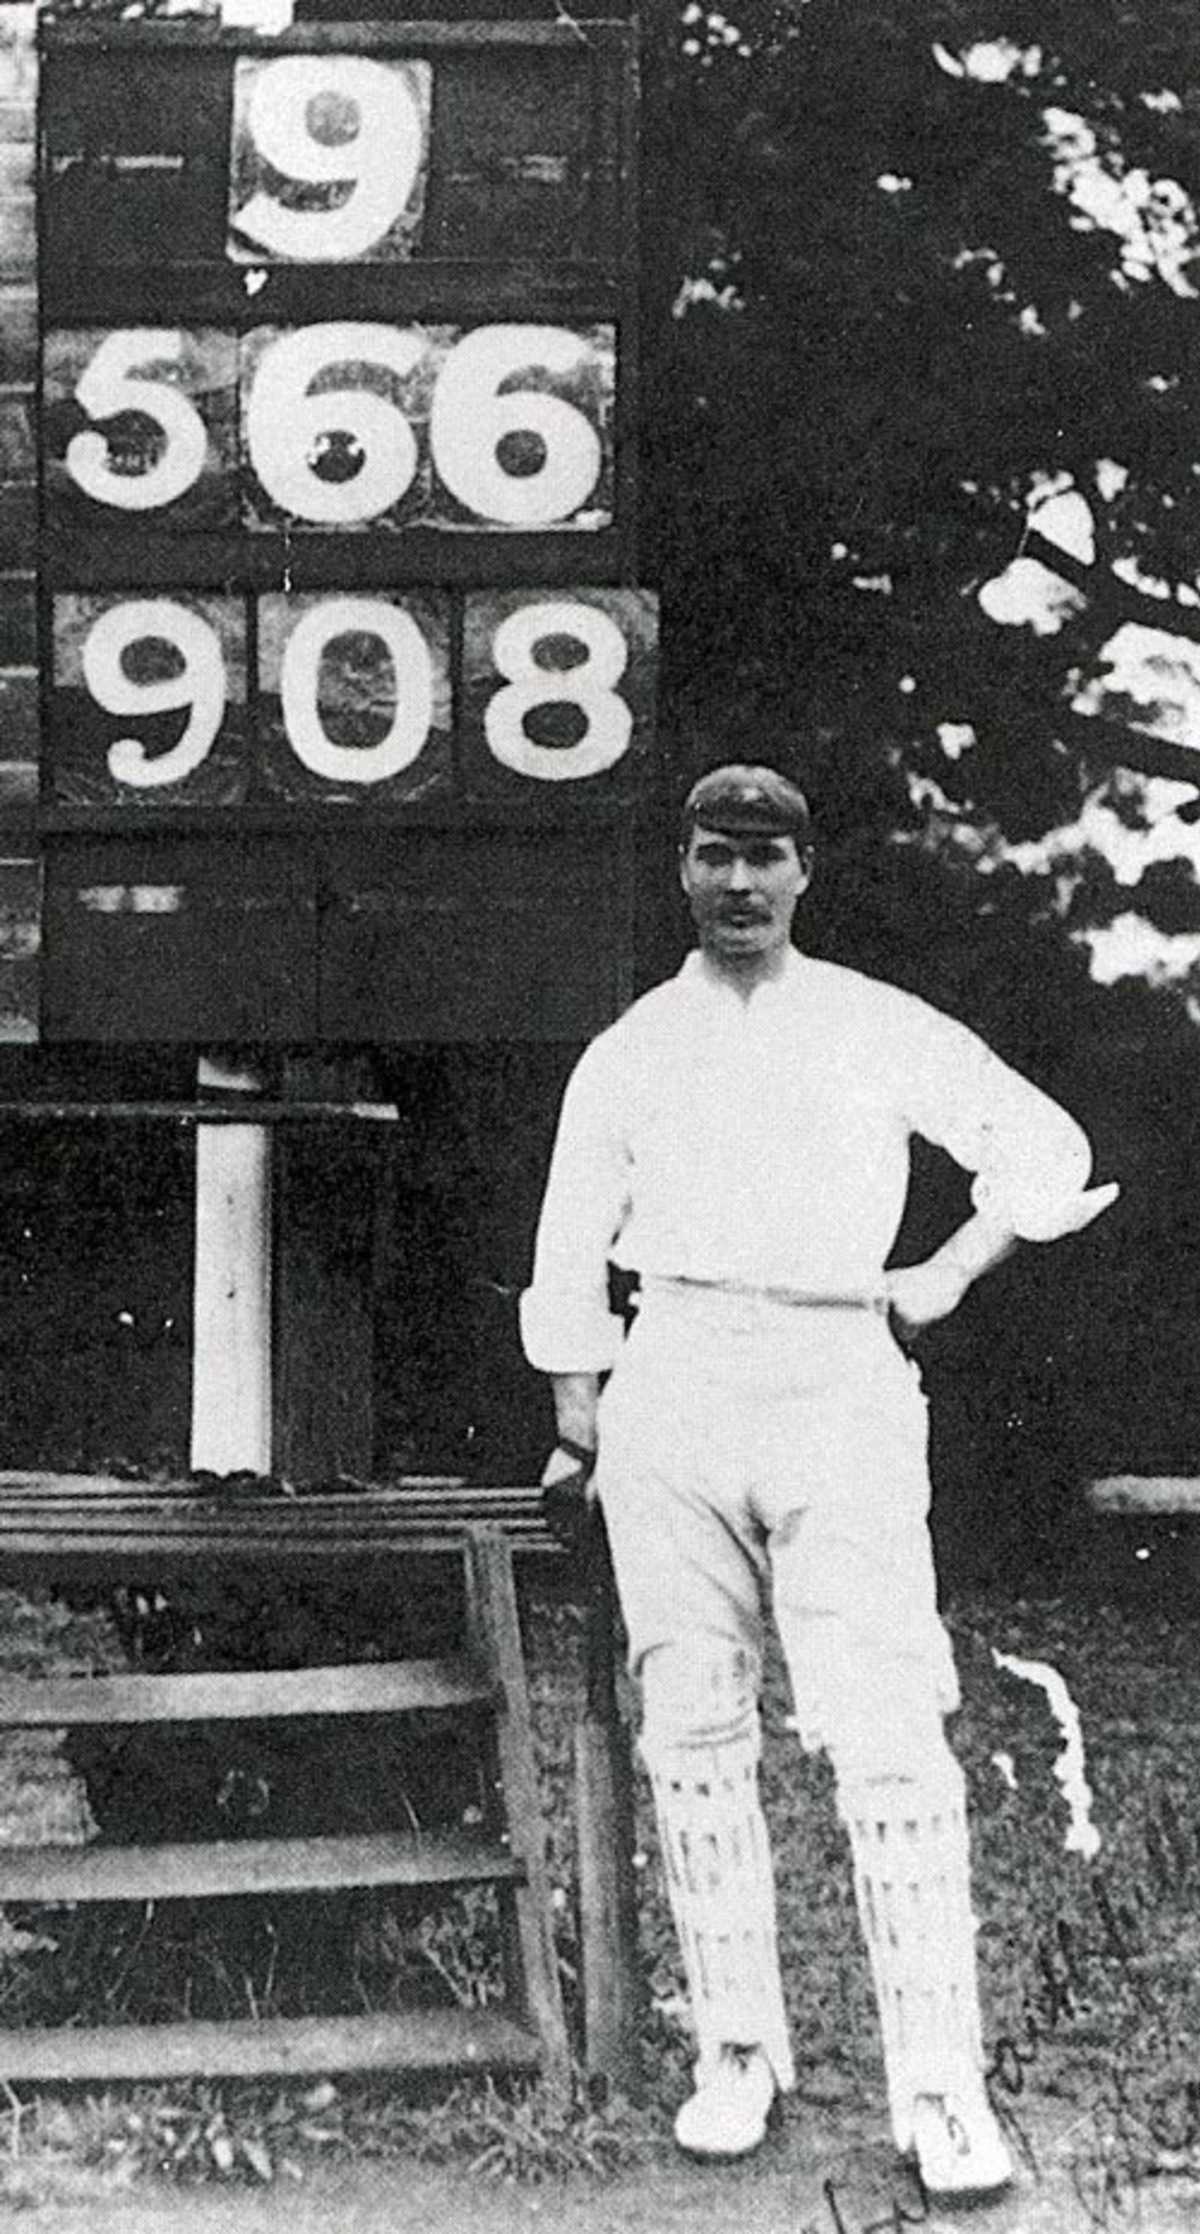 Charles Eady next to the scoreboard after his remarkable innings